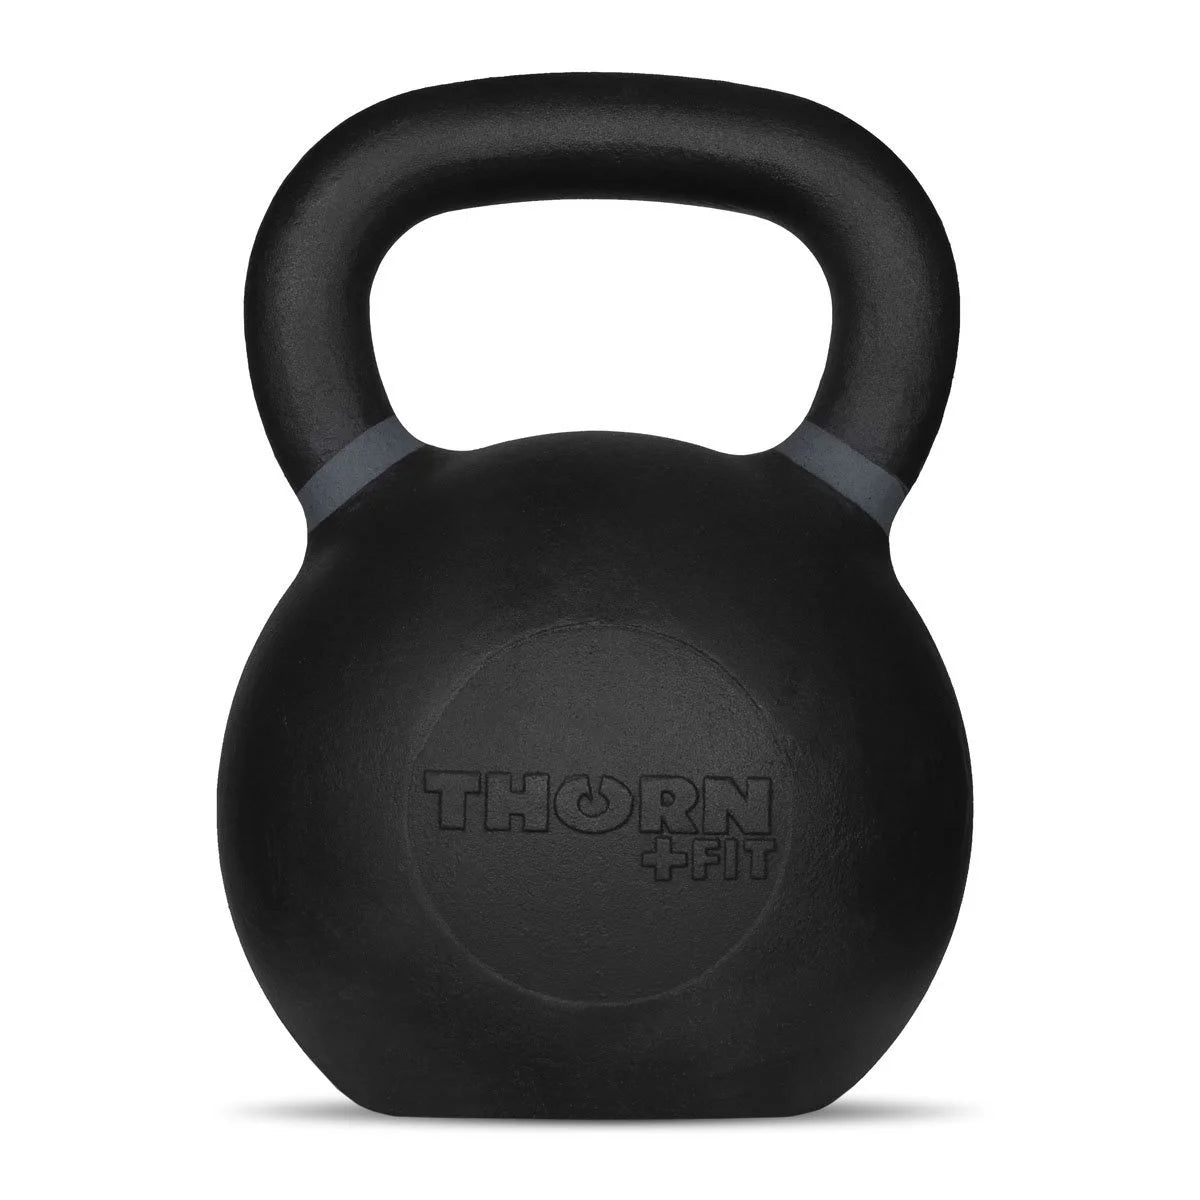 Hantel THORN FIT CC 2.0 Color coded Kettlebell 56kg